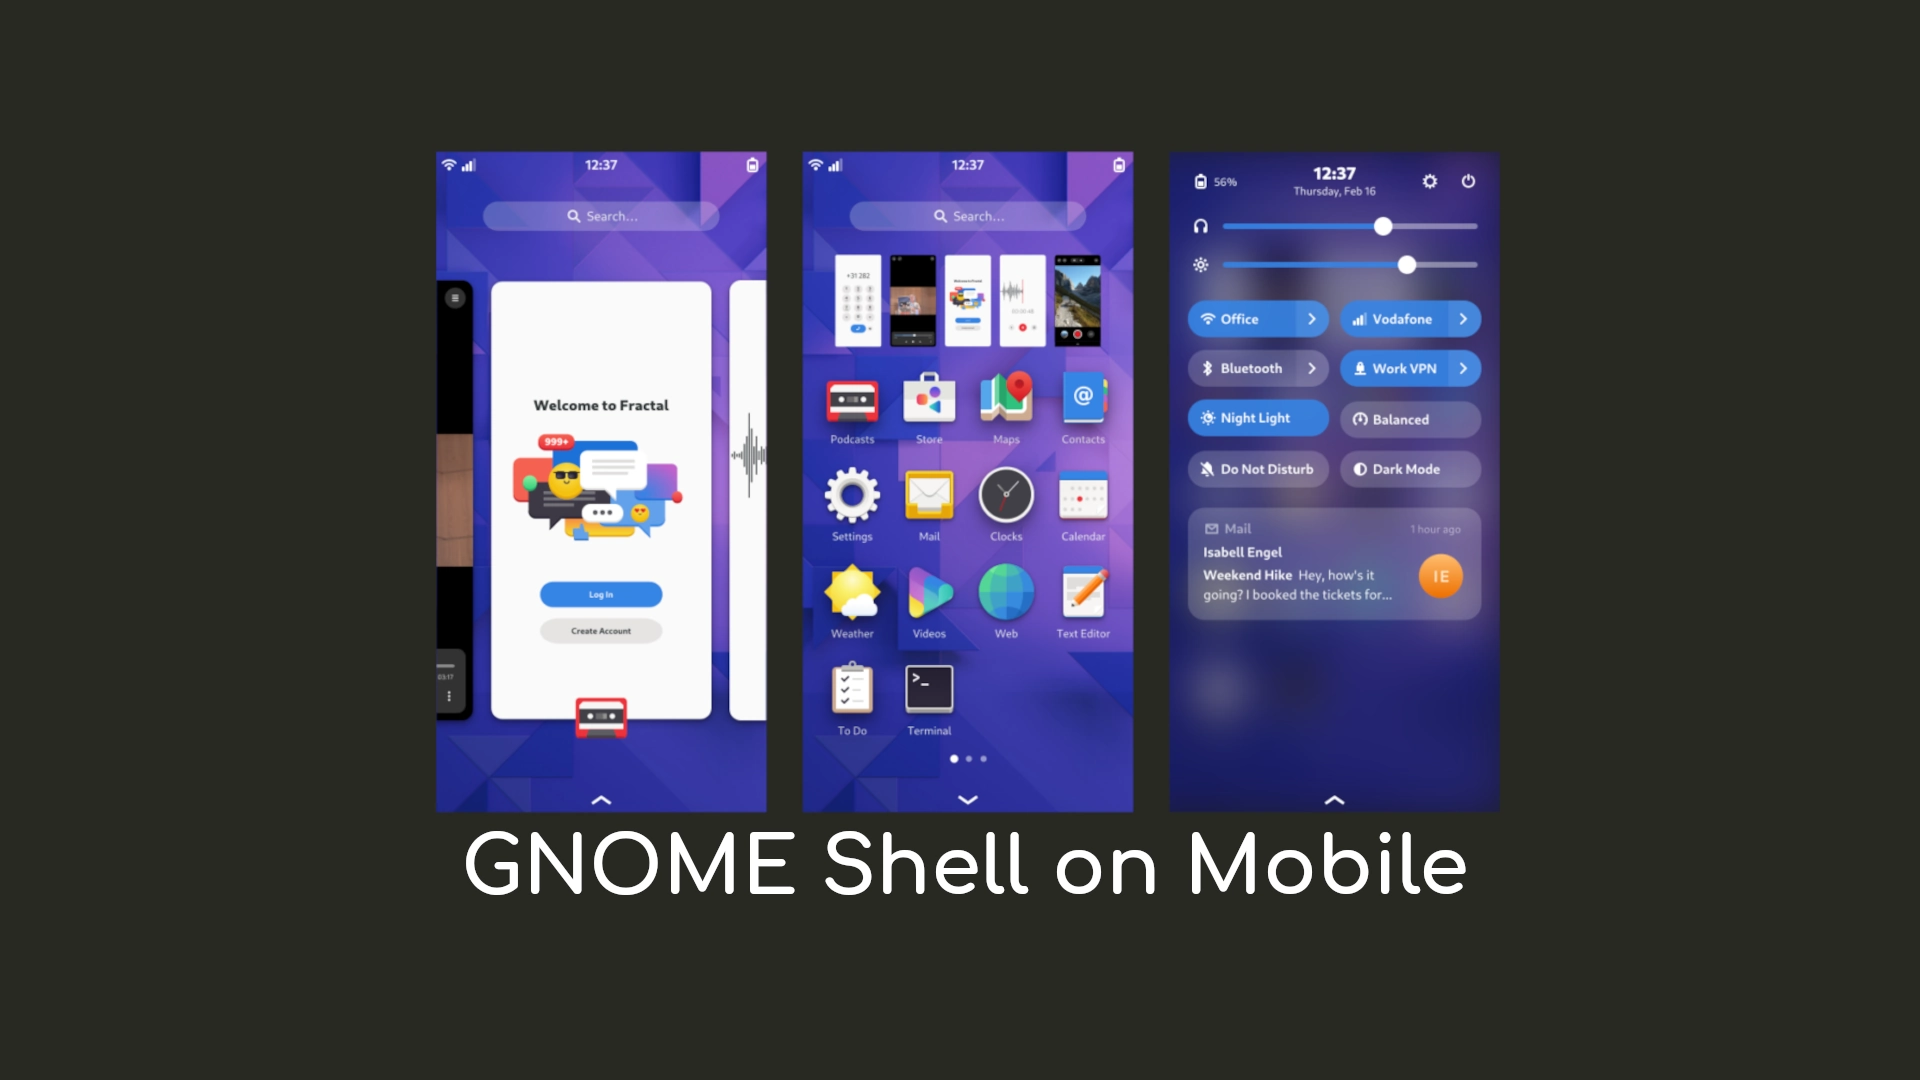 GNOME Shell on Mobile Is Shaping Up Nicely, Gets New Navigation Gestures, Quick Settings